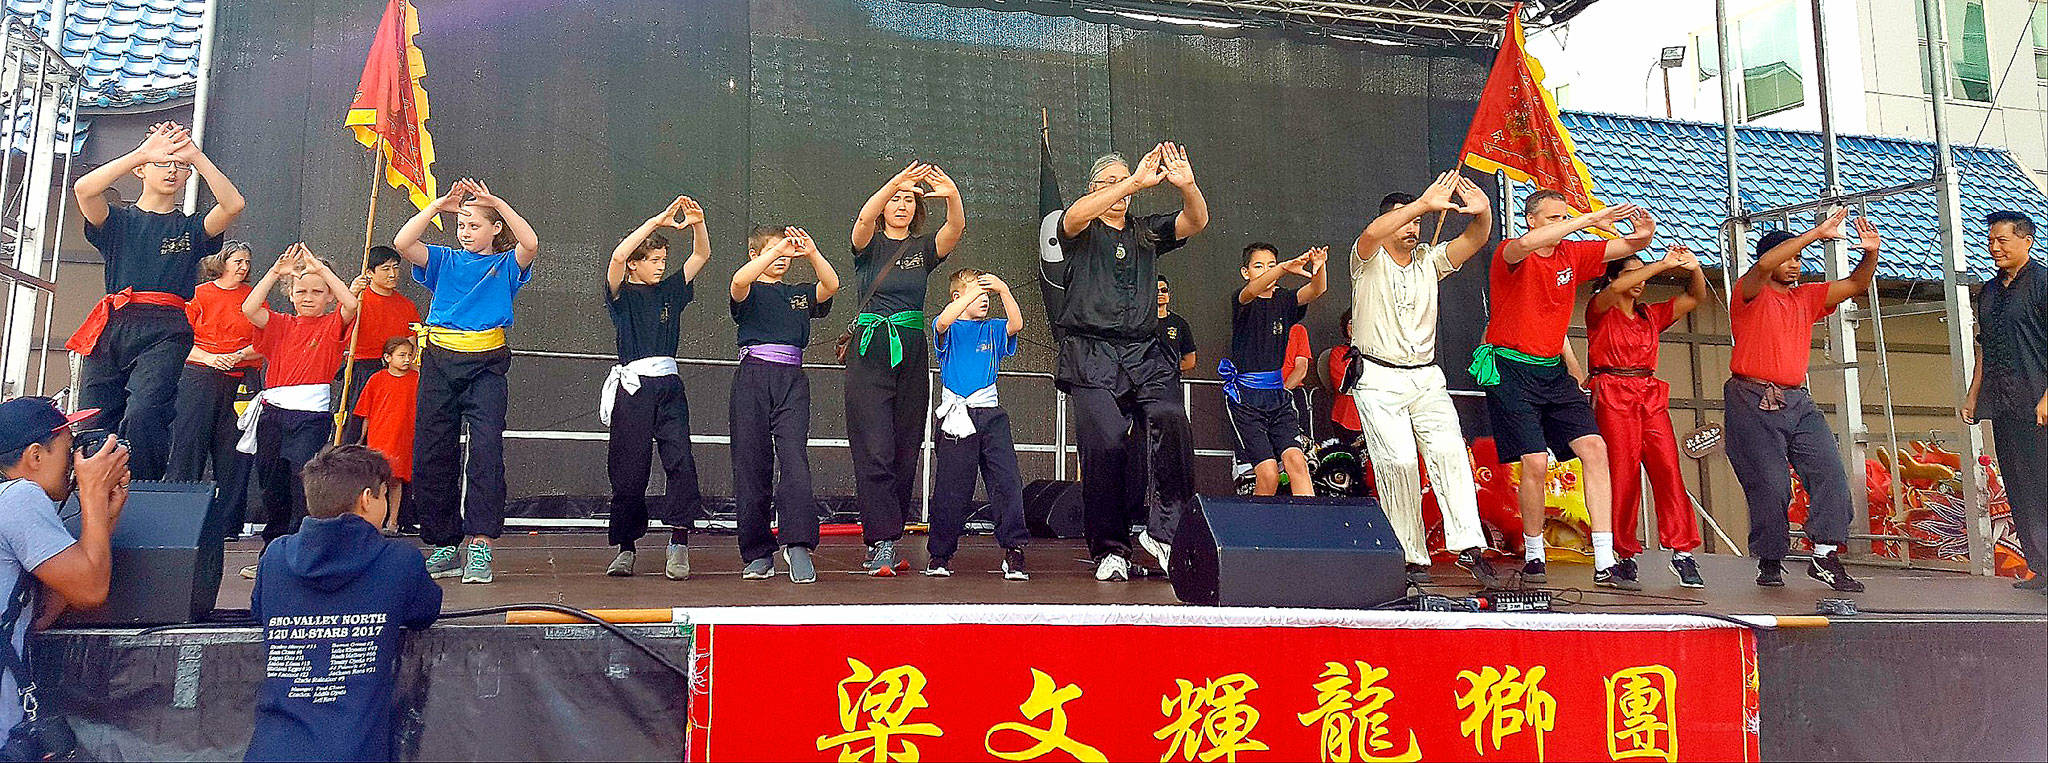 Members of the Kung Fu Club of Fall City demonstrate Raging River Wing Chun Kung Fu July 16 in Seattle’s Chinatown.                                Courtesy Photo